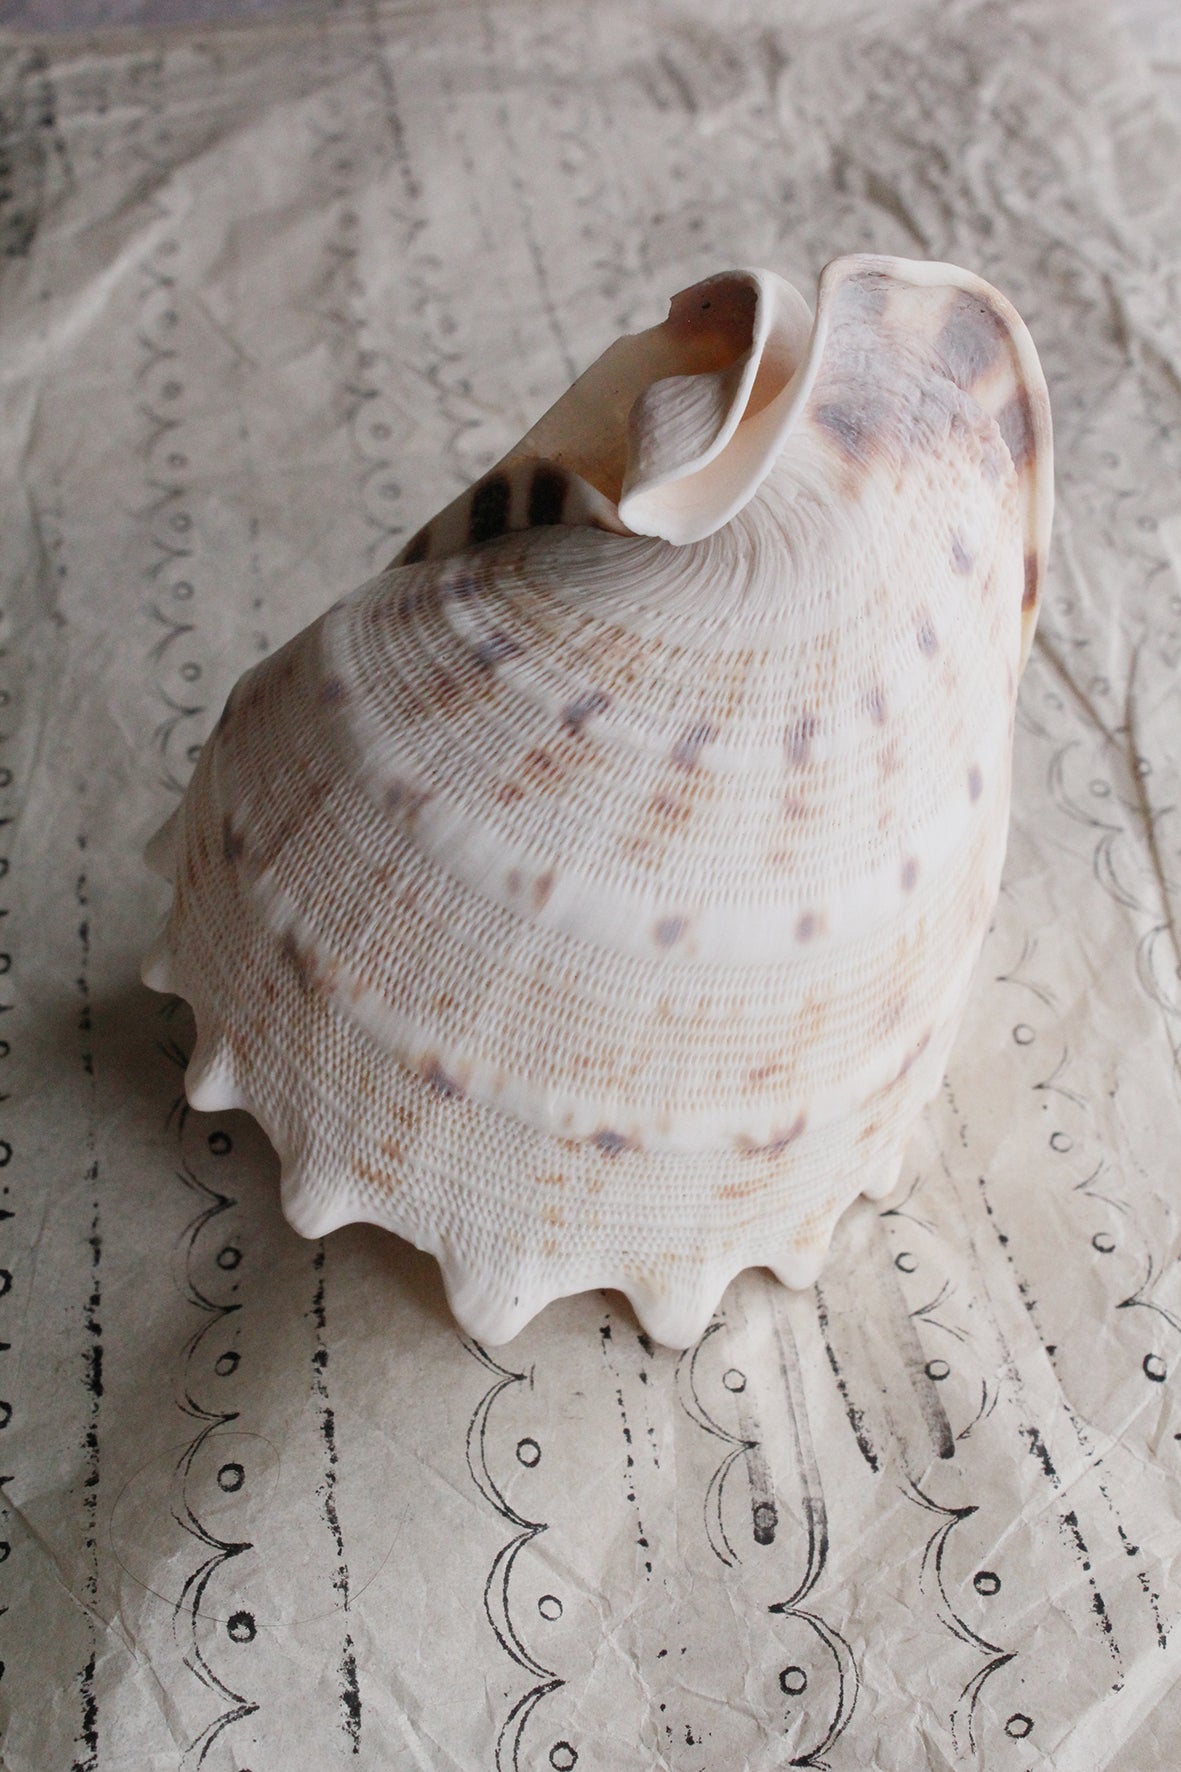 Precious large old still life sea shell - (number one)